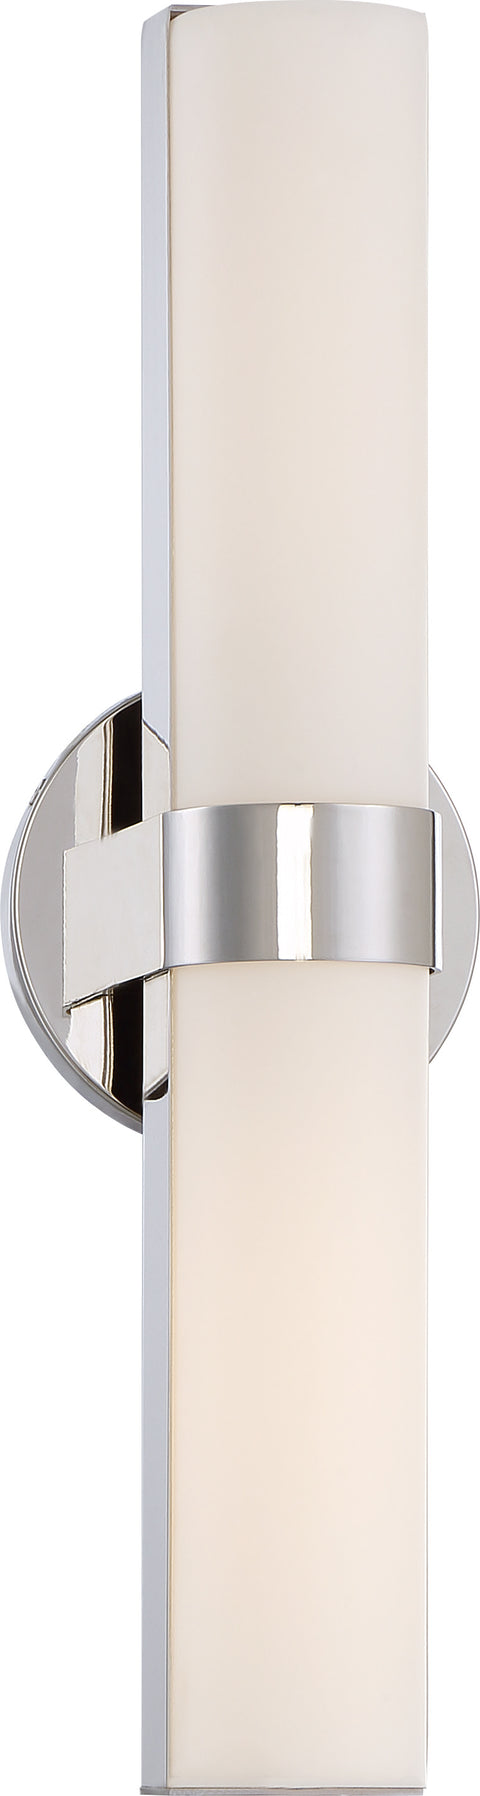 Nuvo Lighting 62/722 Bond Double 17 1/2 Inch LED Vanity with White Acrylic Lens